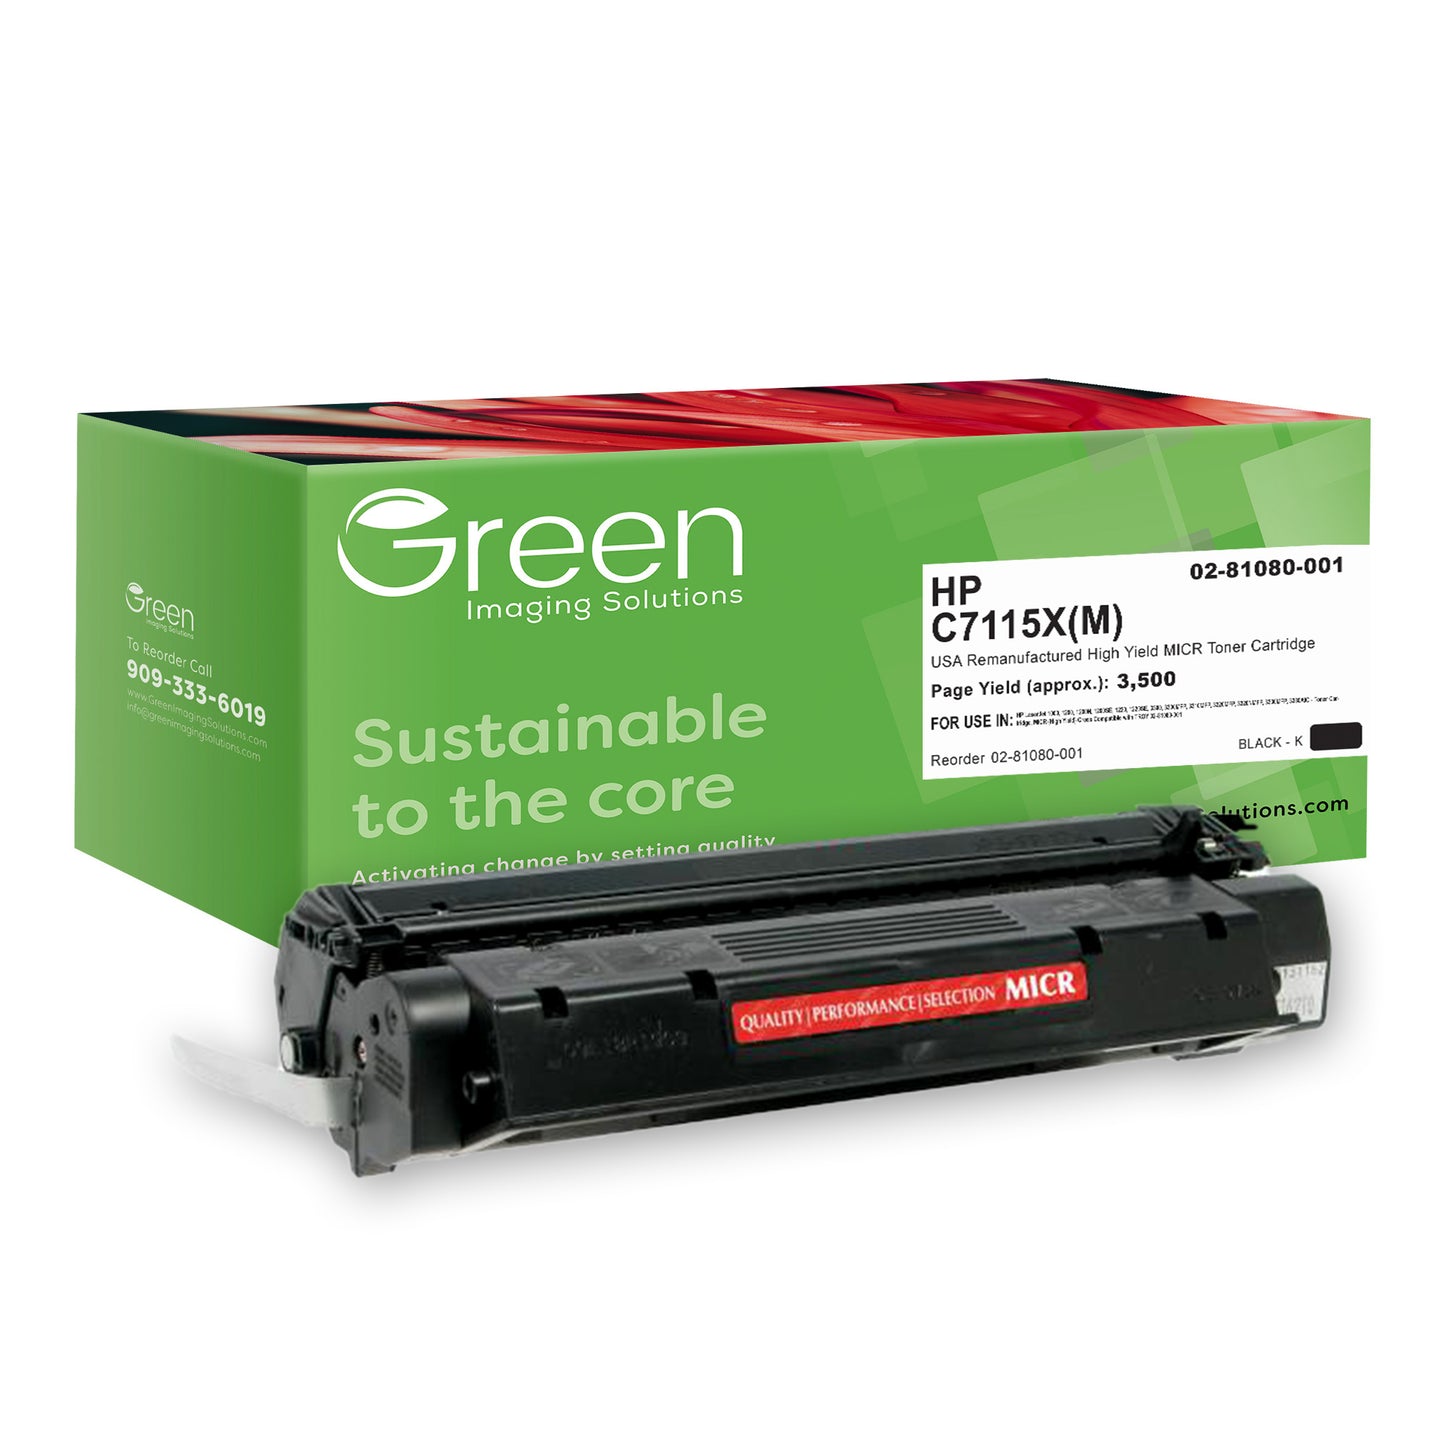 GIS USA Remanufactured High Yield MICR Toner Cartridge for HP C7115X, TROY 02-81080-001